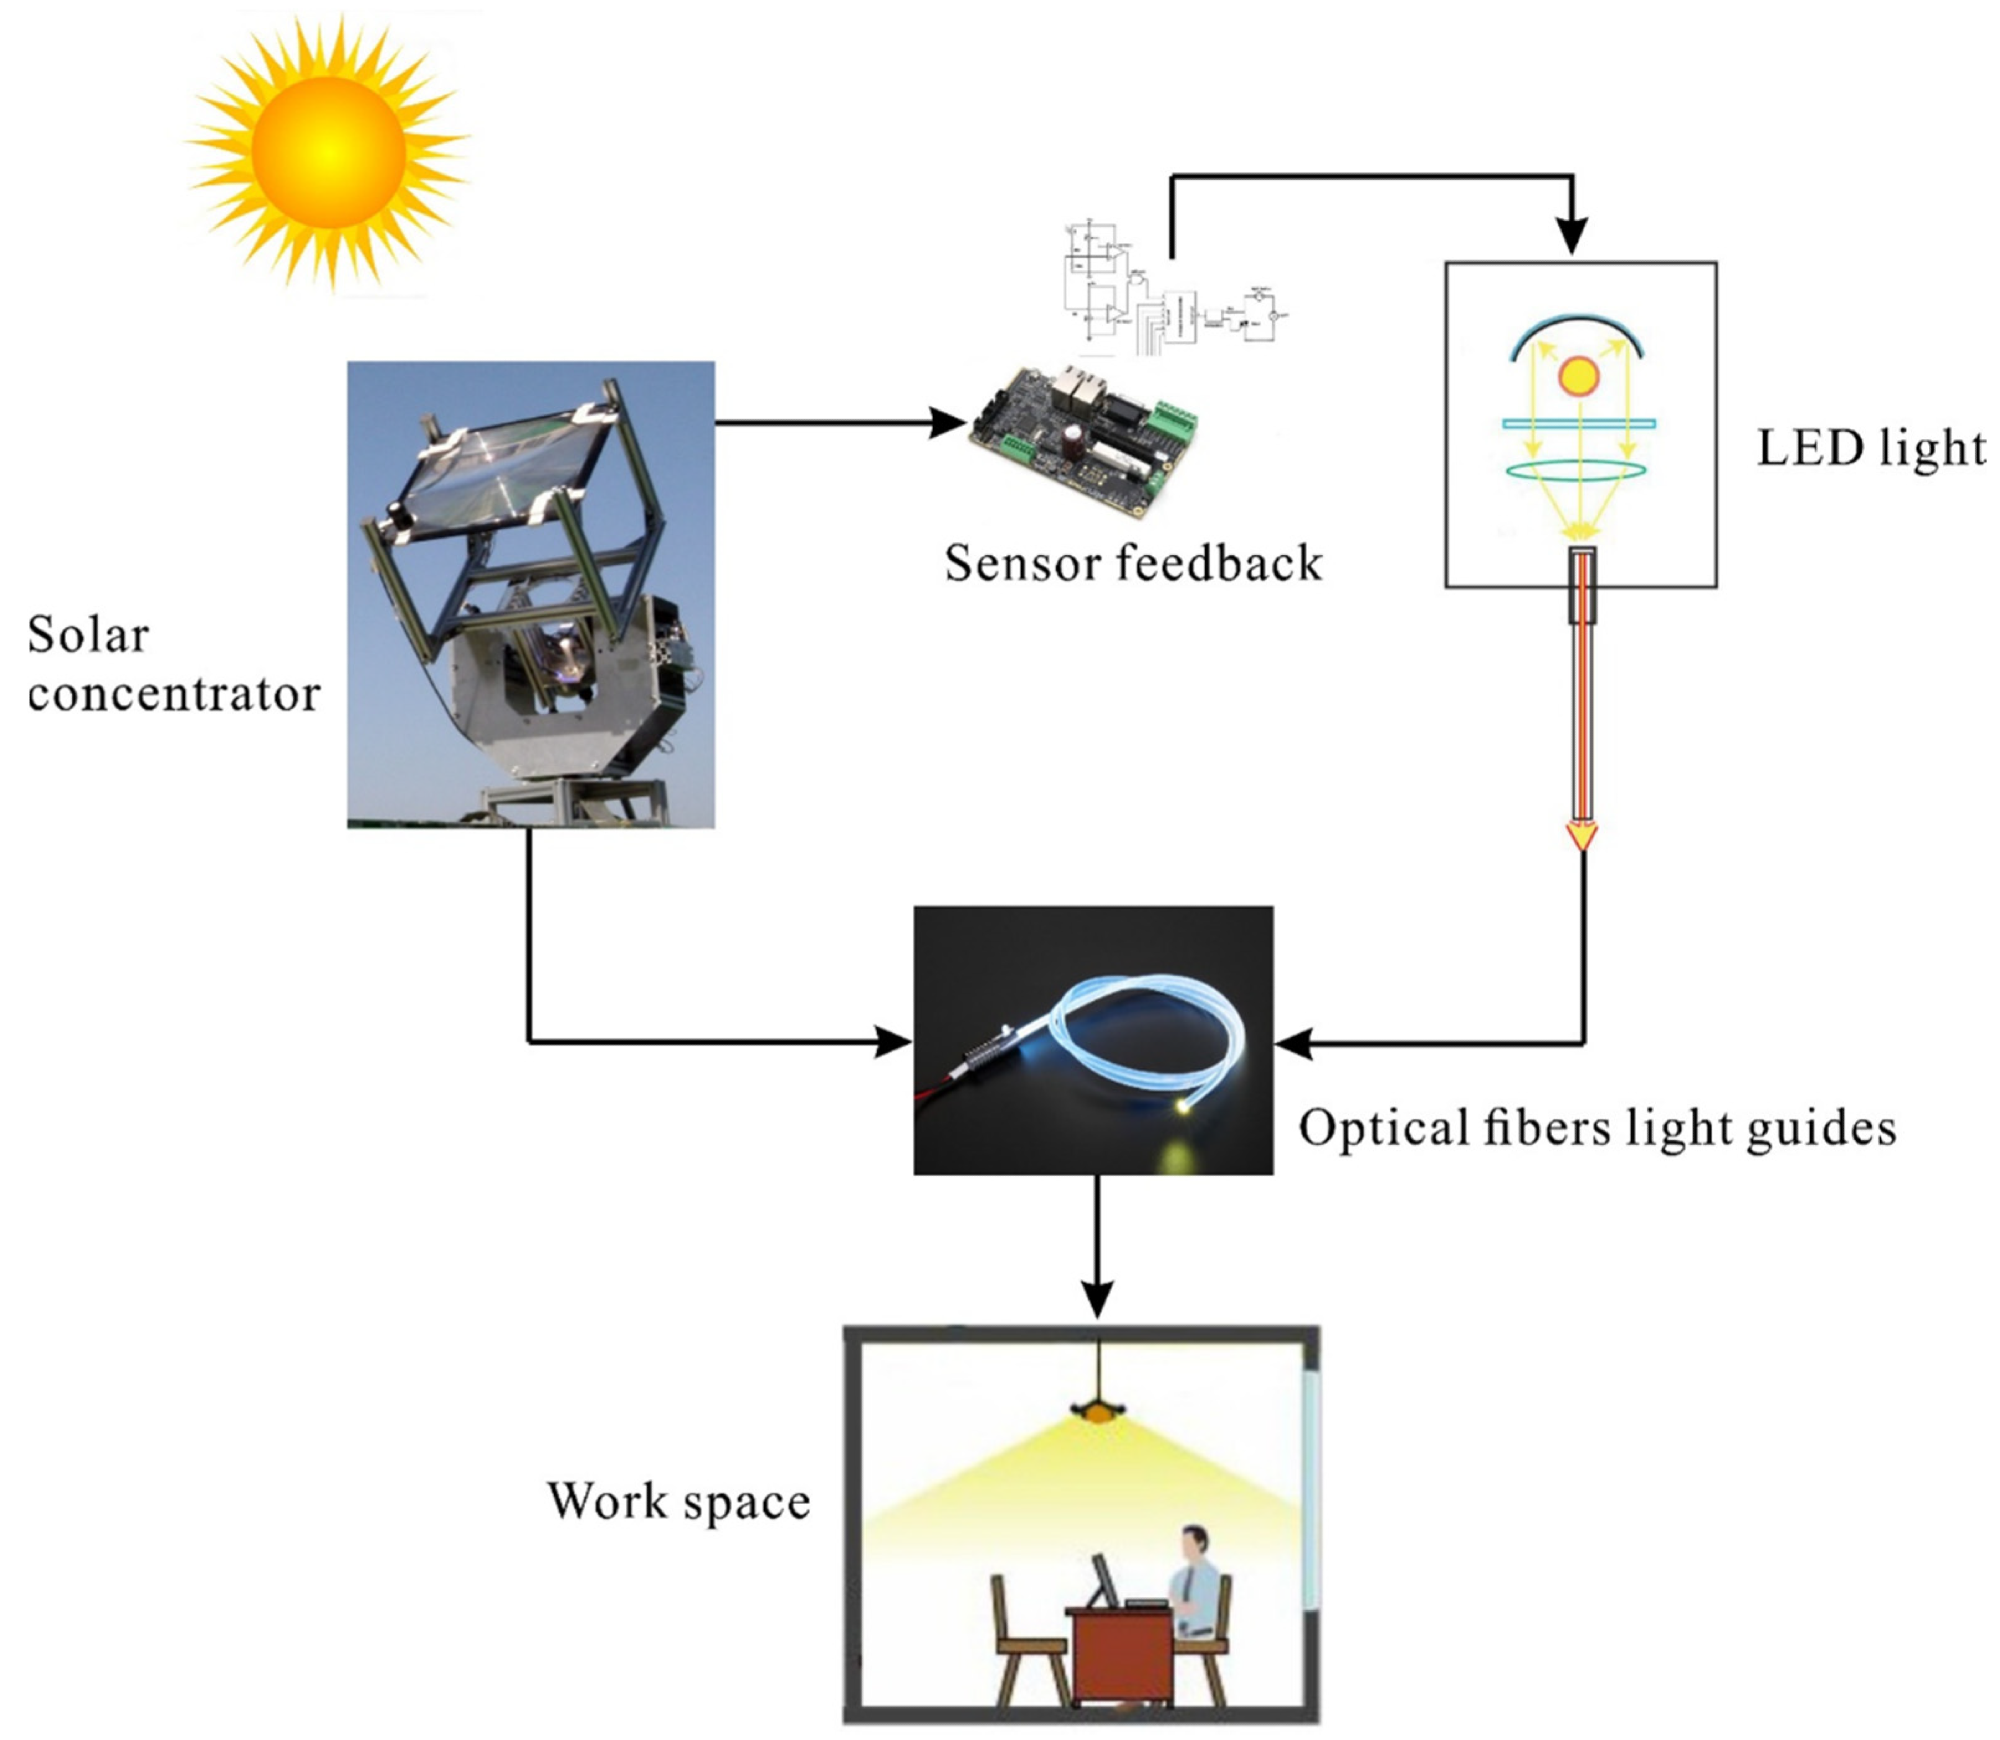 Diagrams of the hybrid lighting system.